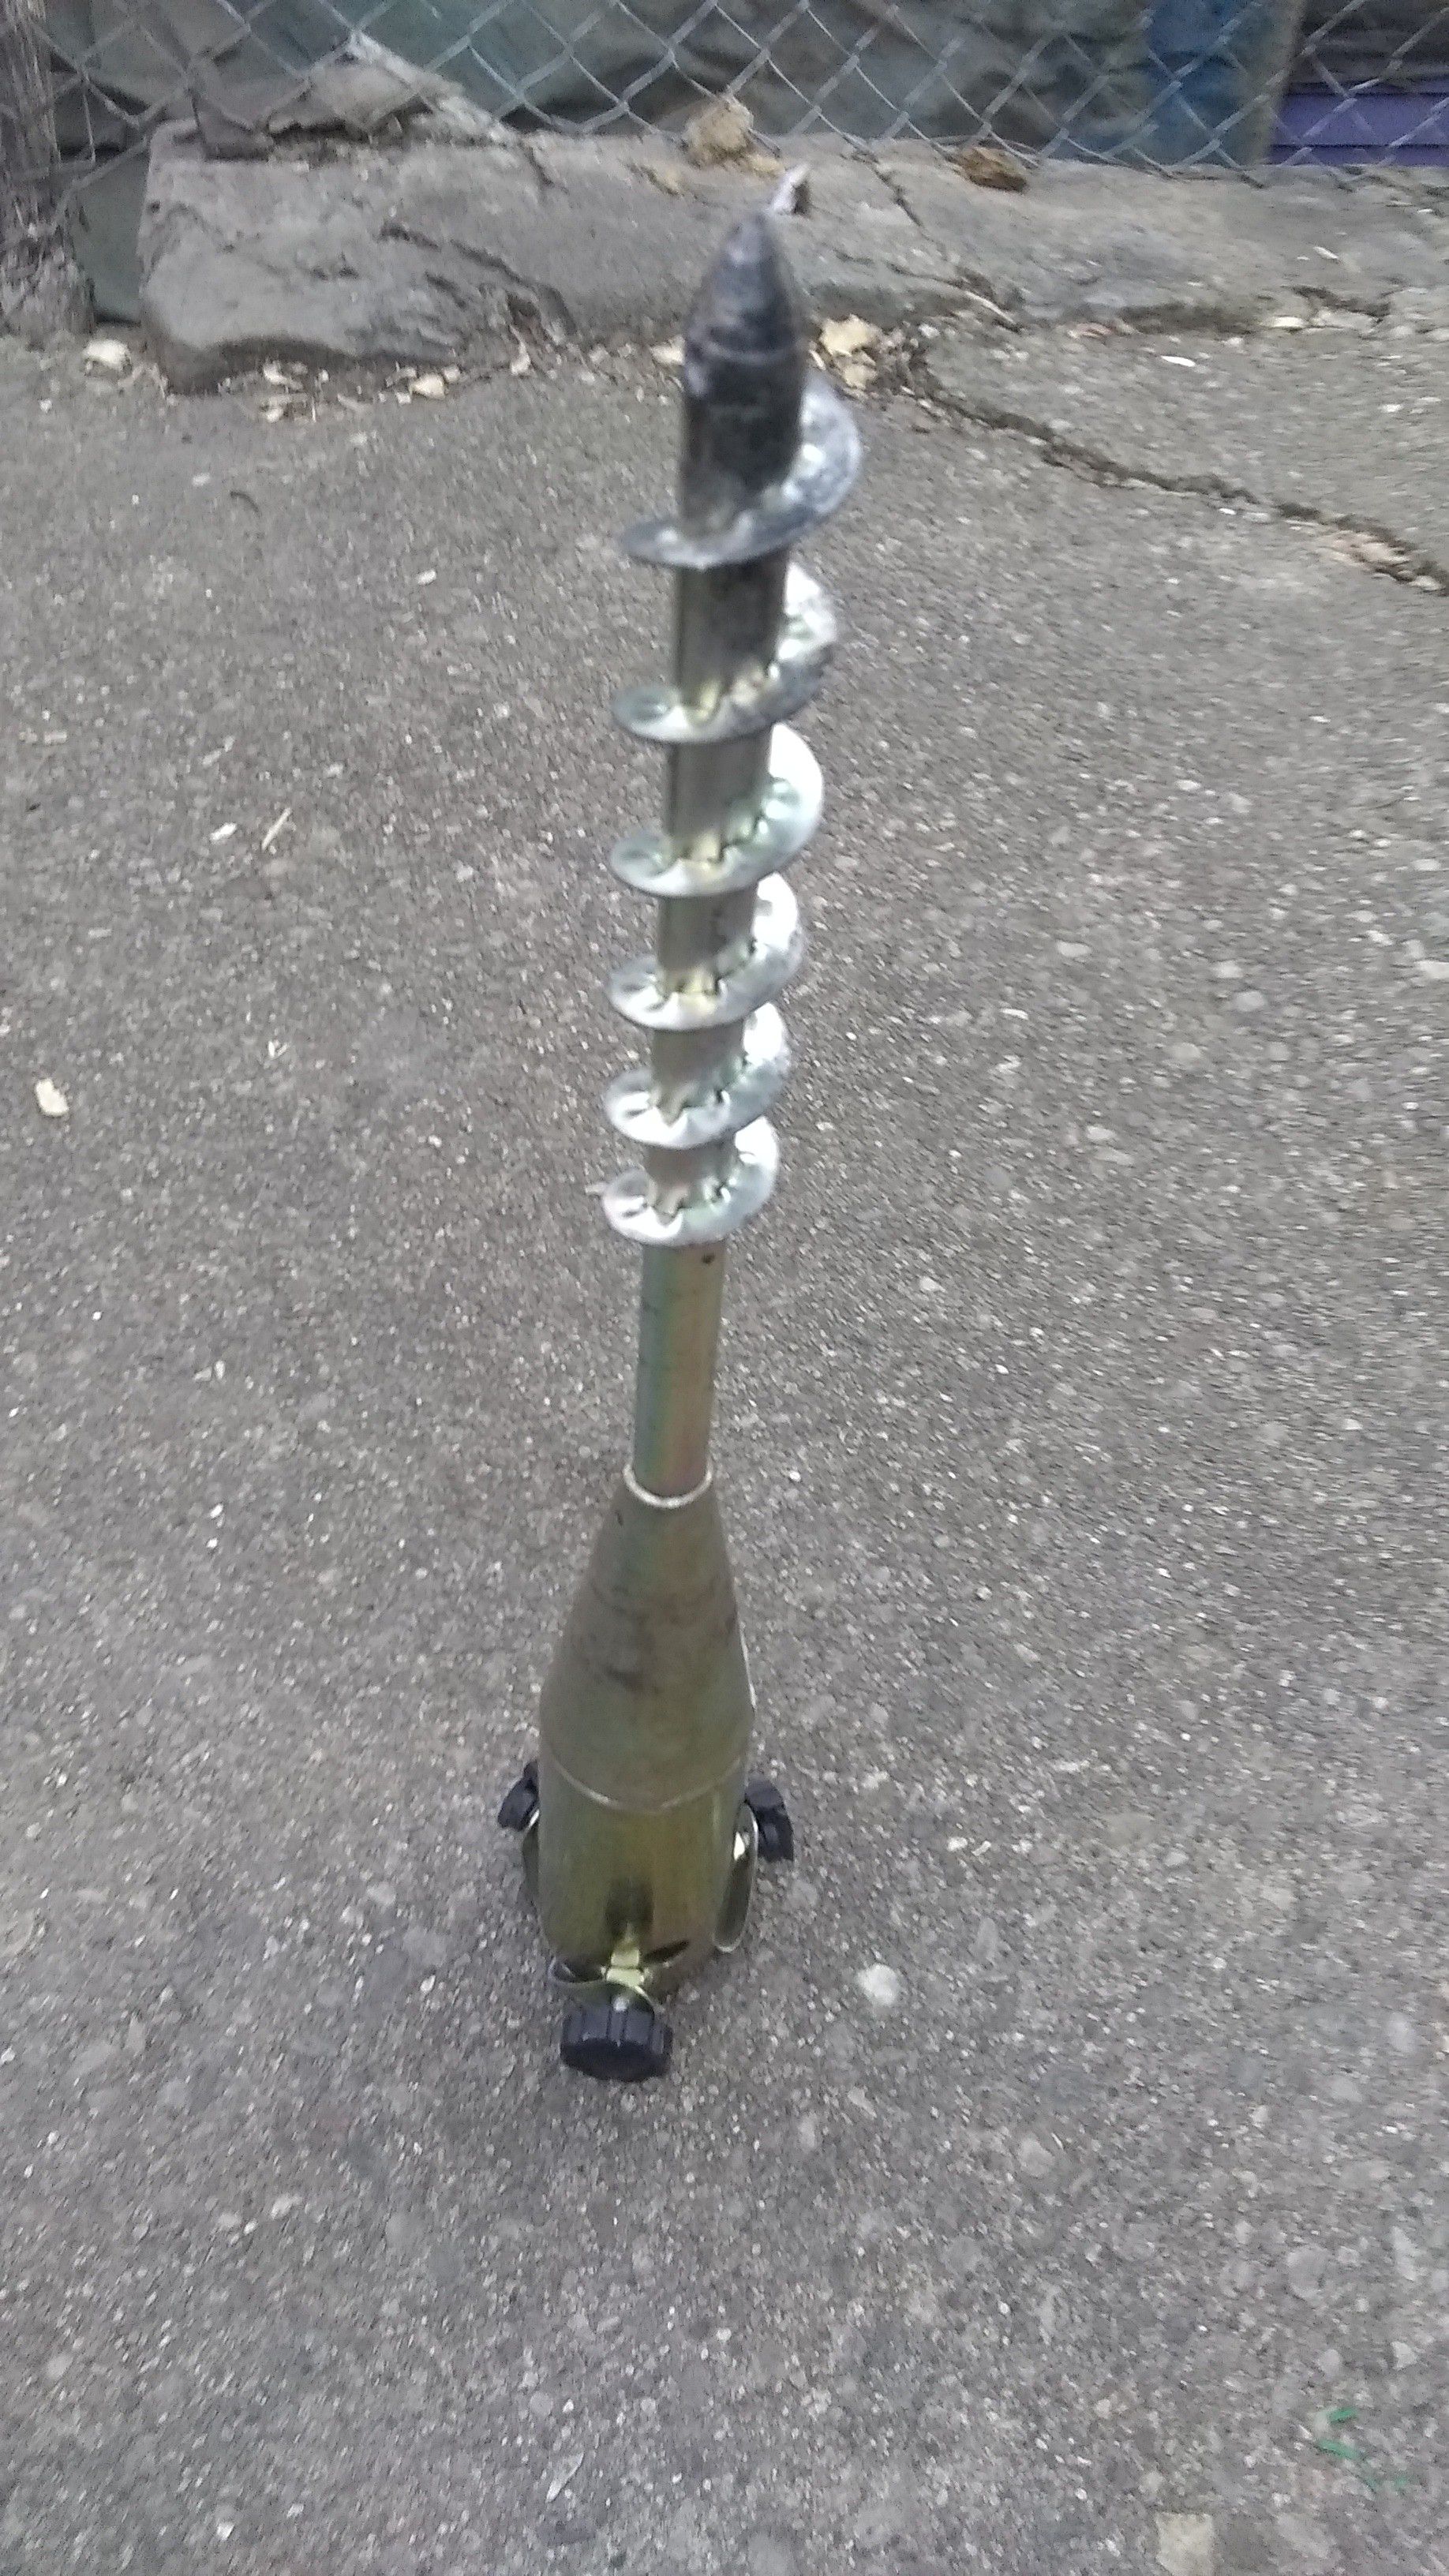 Large drill piece